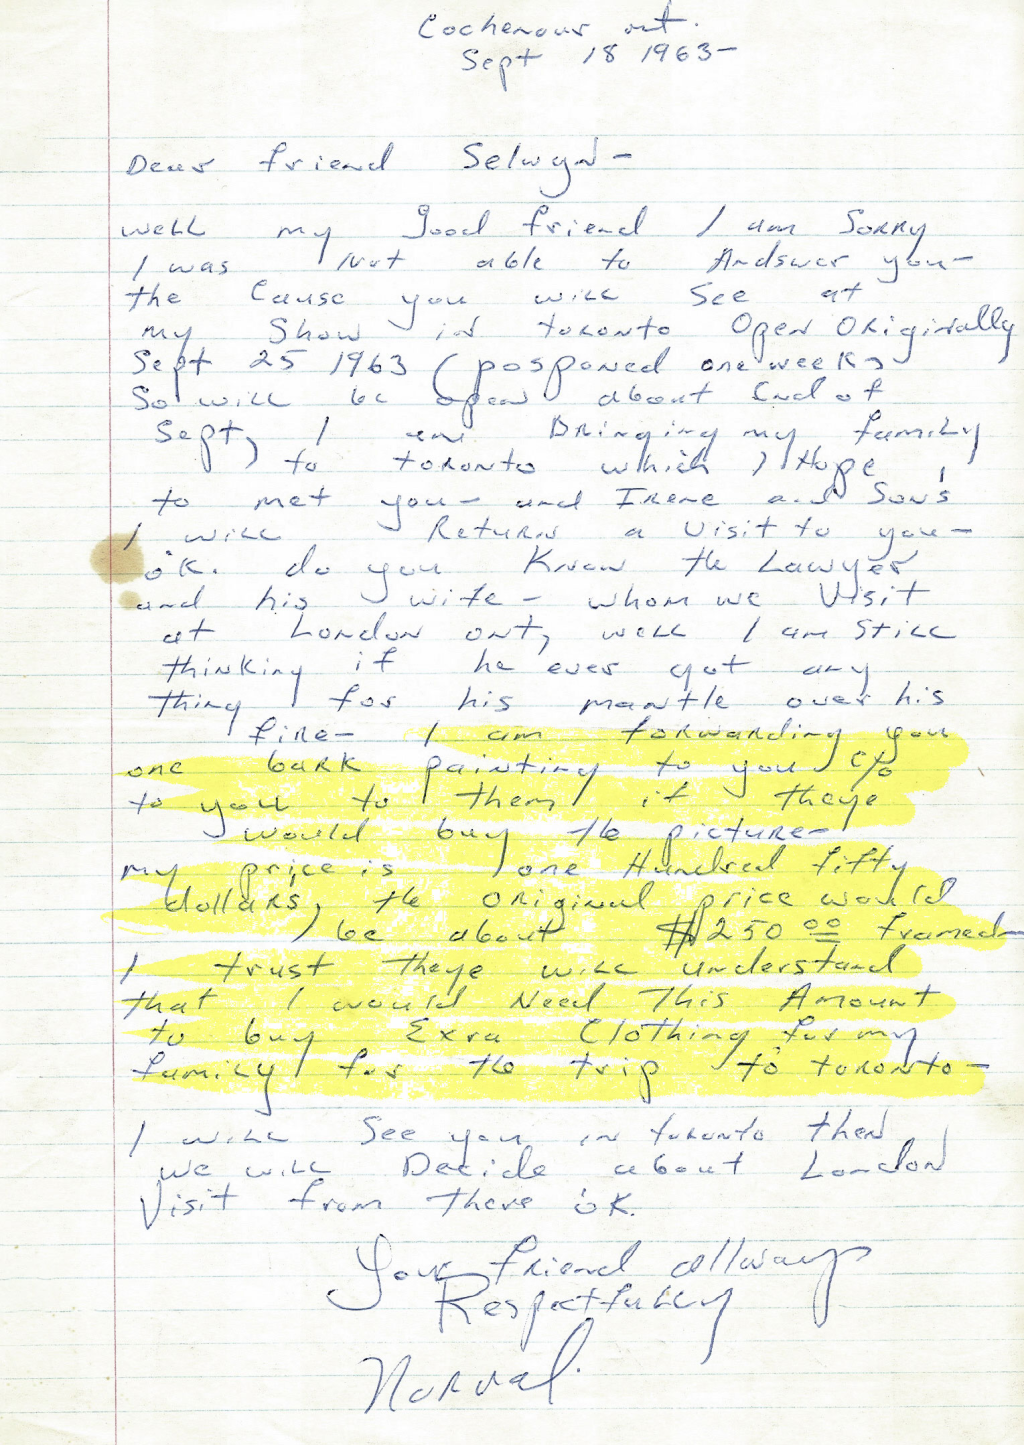 A picture of a handwritten letter from Morrisseau